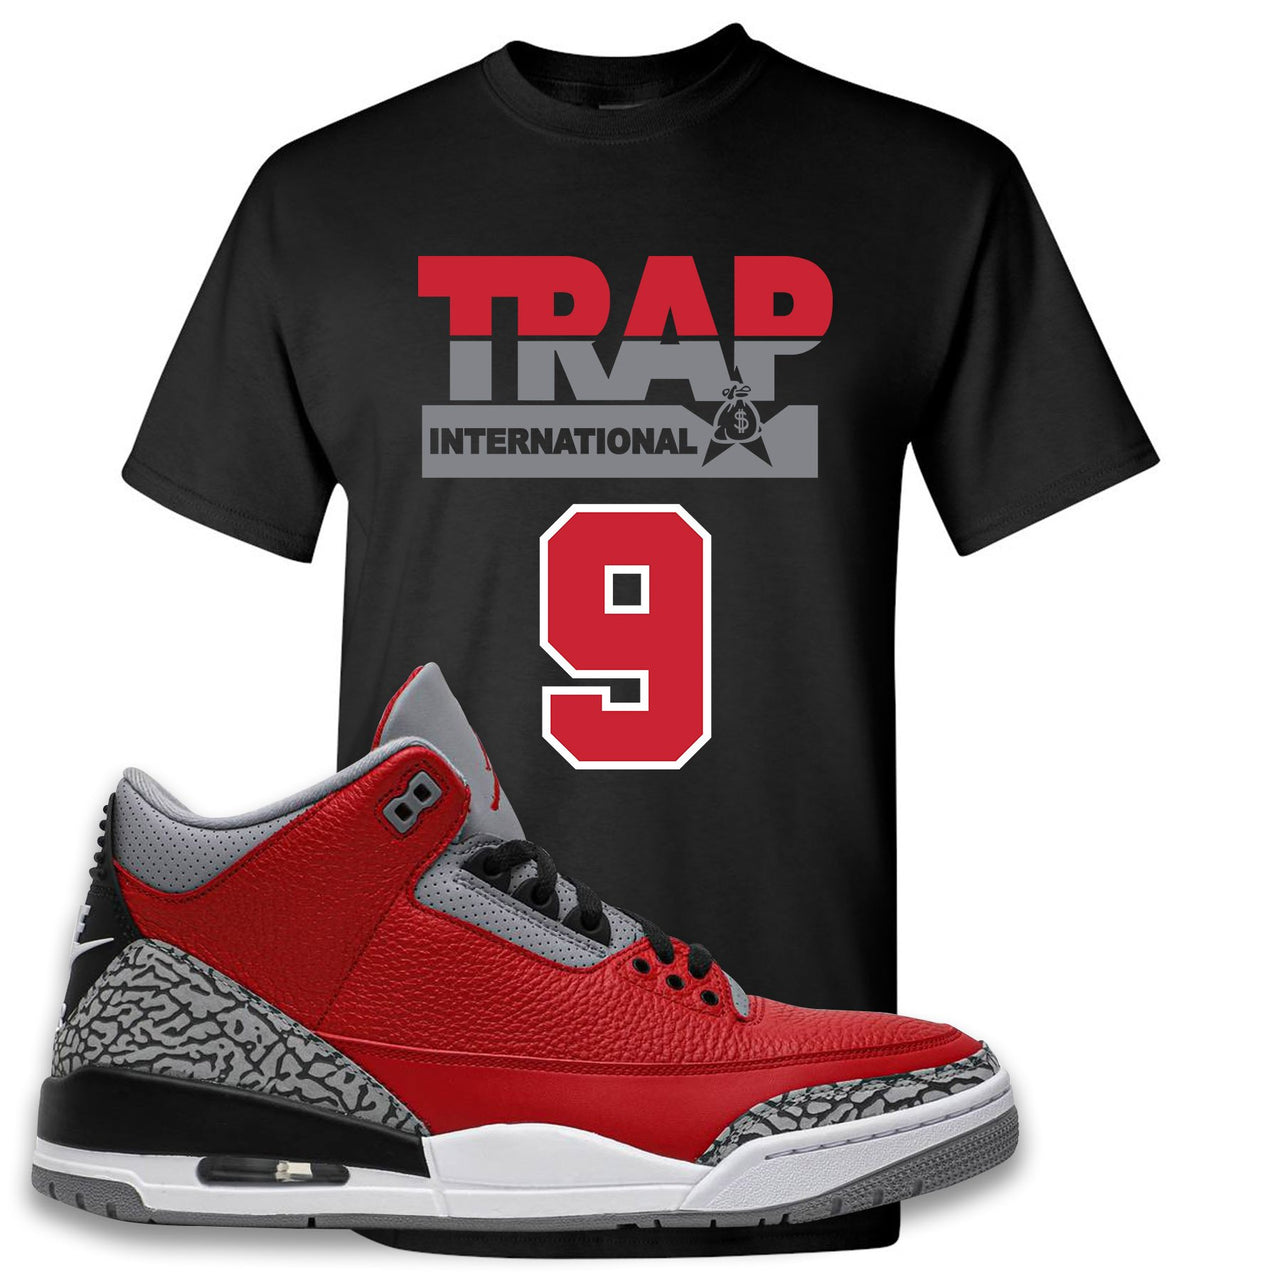 Jordan 3 Red Cement Chicago All-Star Sneaker Black T Shirt | Tees to match Jordan 3 All Star Red Cement Shoes | Trap International